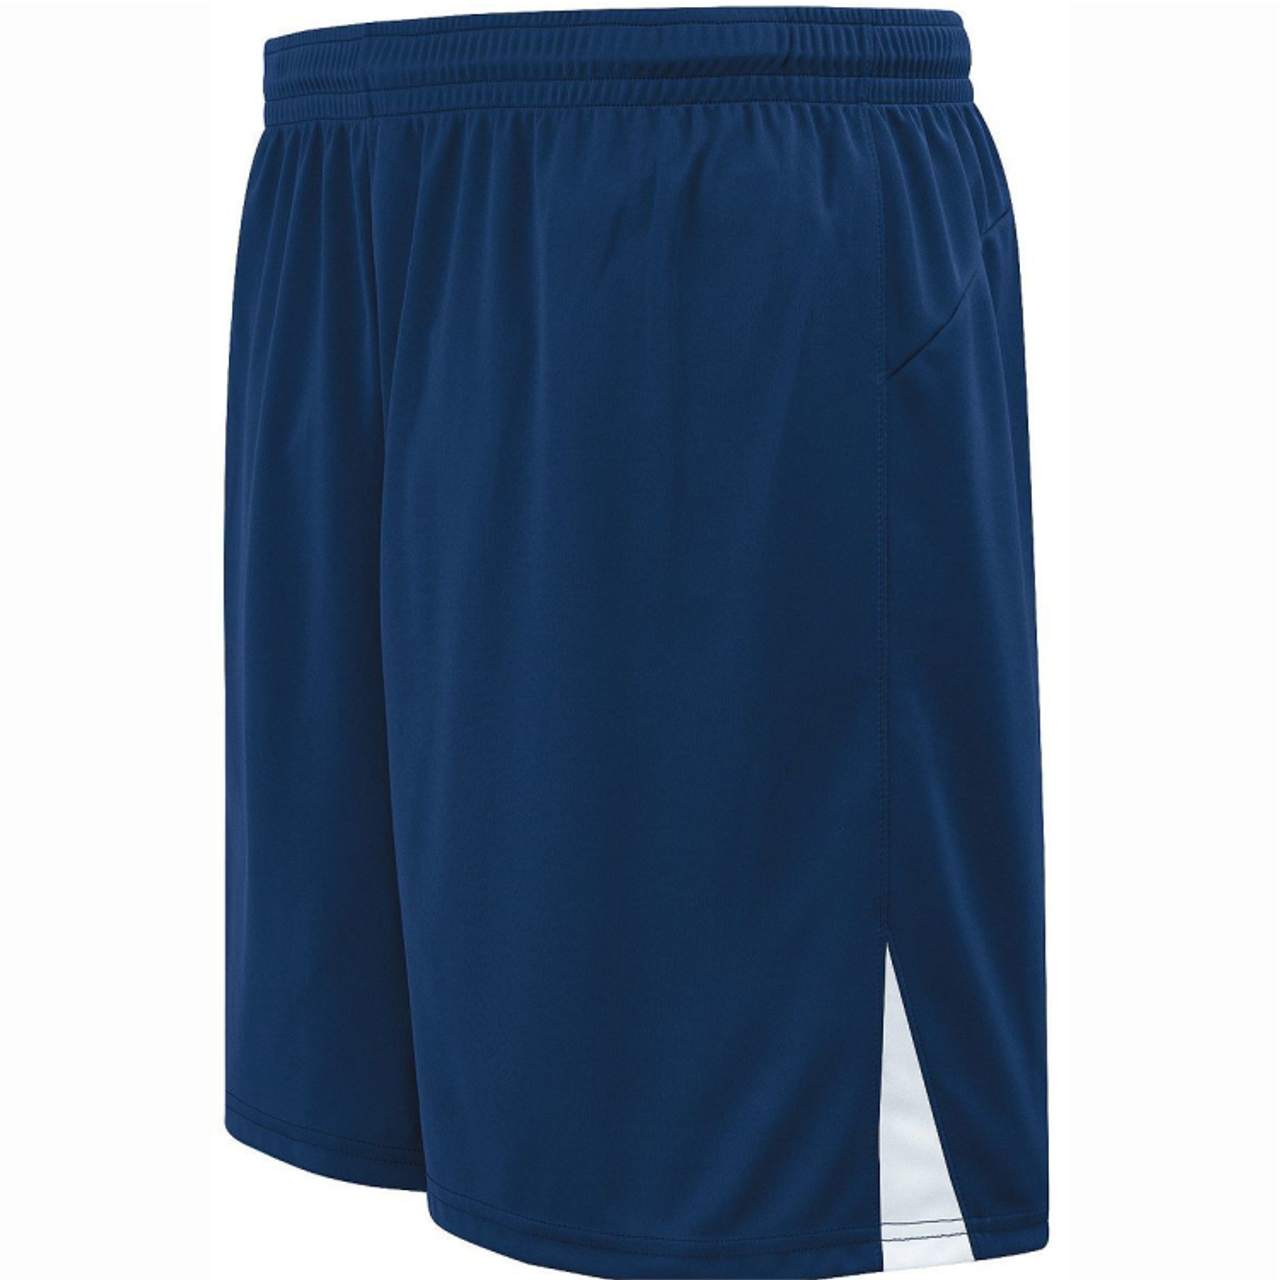 Perryville Volleyball Men's Shorts